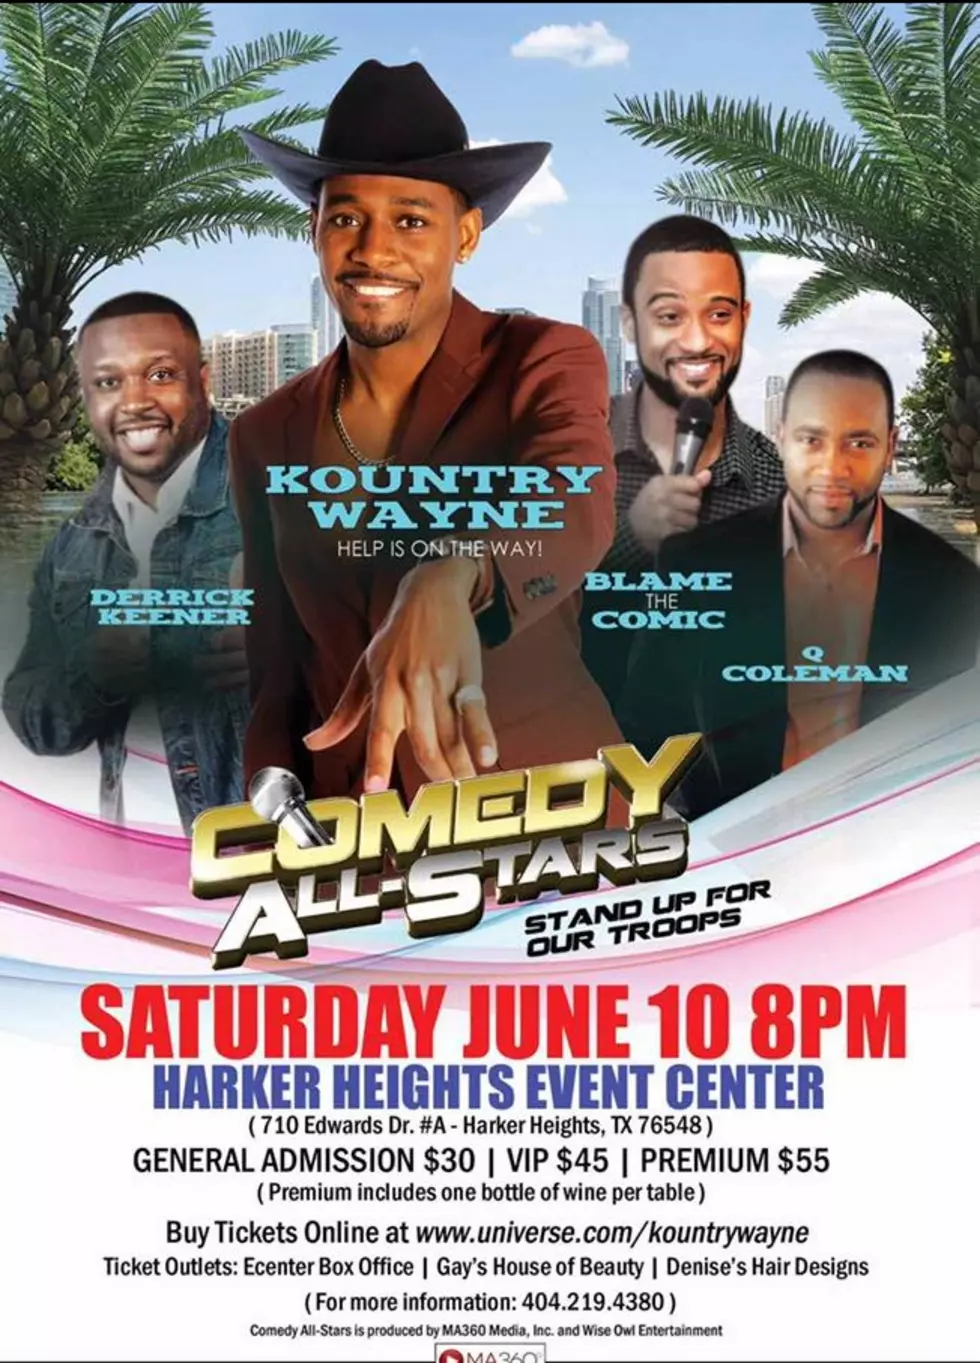 Internet Star/Comedian Kountry Wayne and the Comedy All Stars Coming to Harker Heights Event Center June 10th!